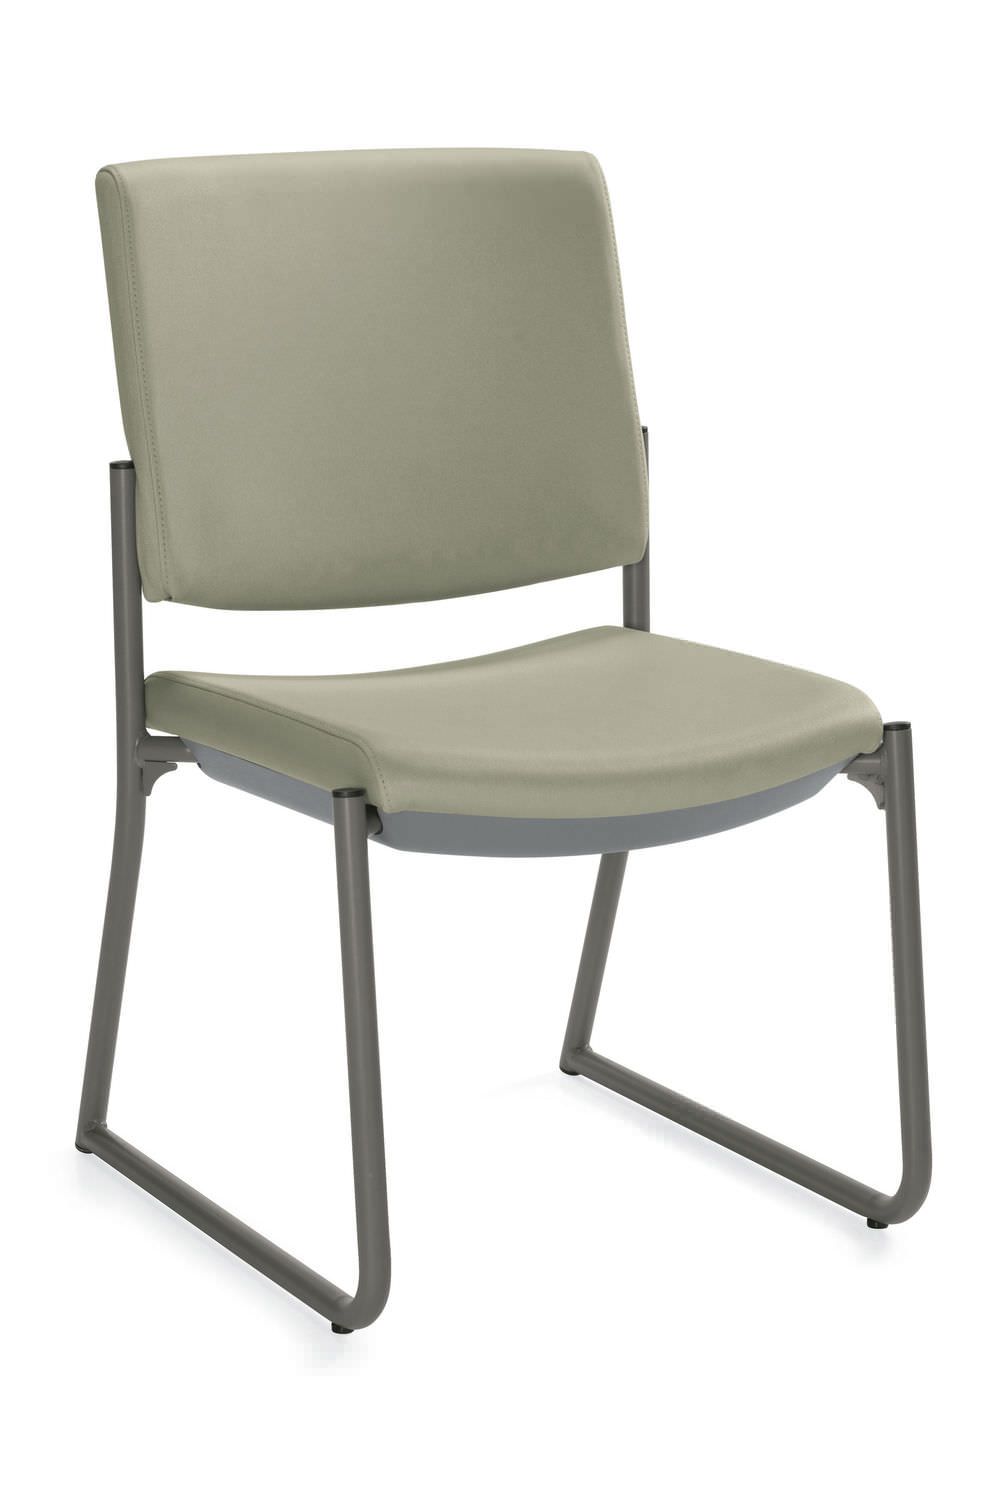 Chair GC3035 Global Care